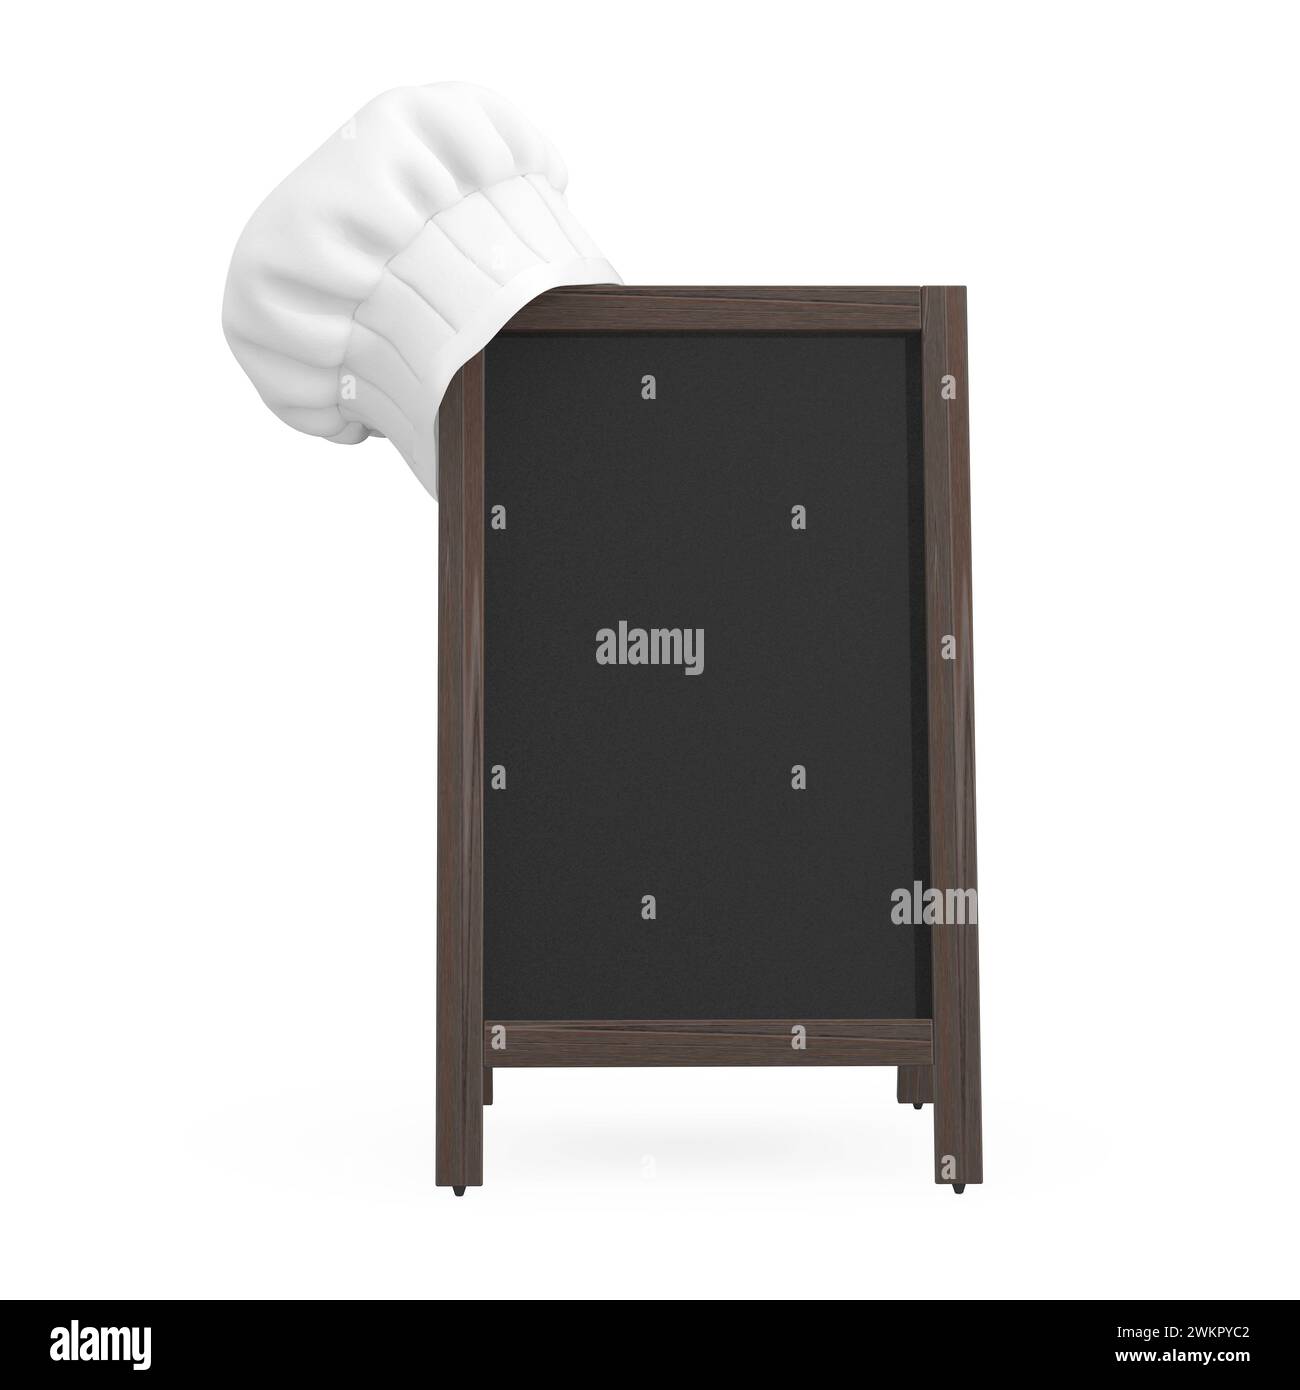 White Clear Professional Chef Hat with Blank Wooden Menu Blackboard Outdoor Display on a white background. 3d Rendering Stock Photo